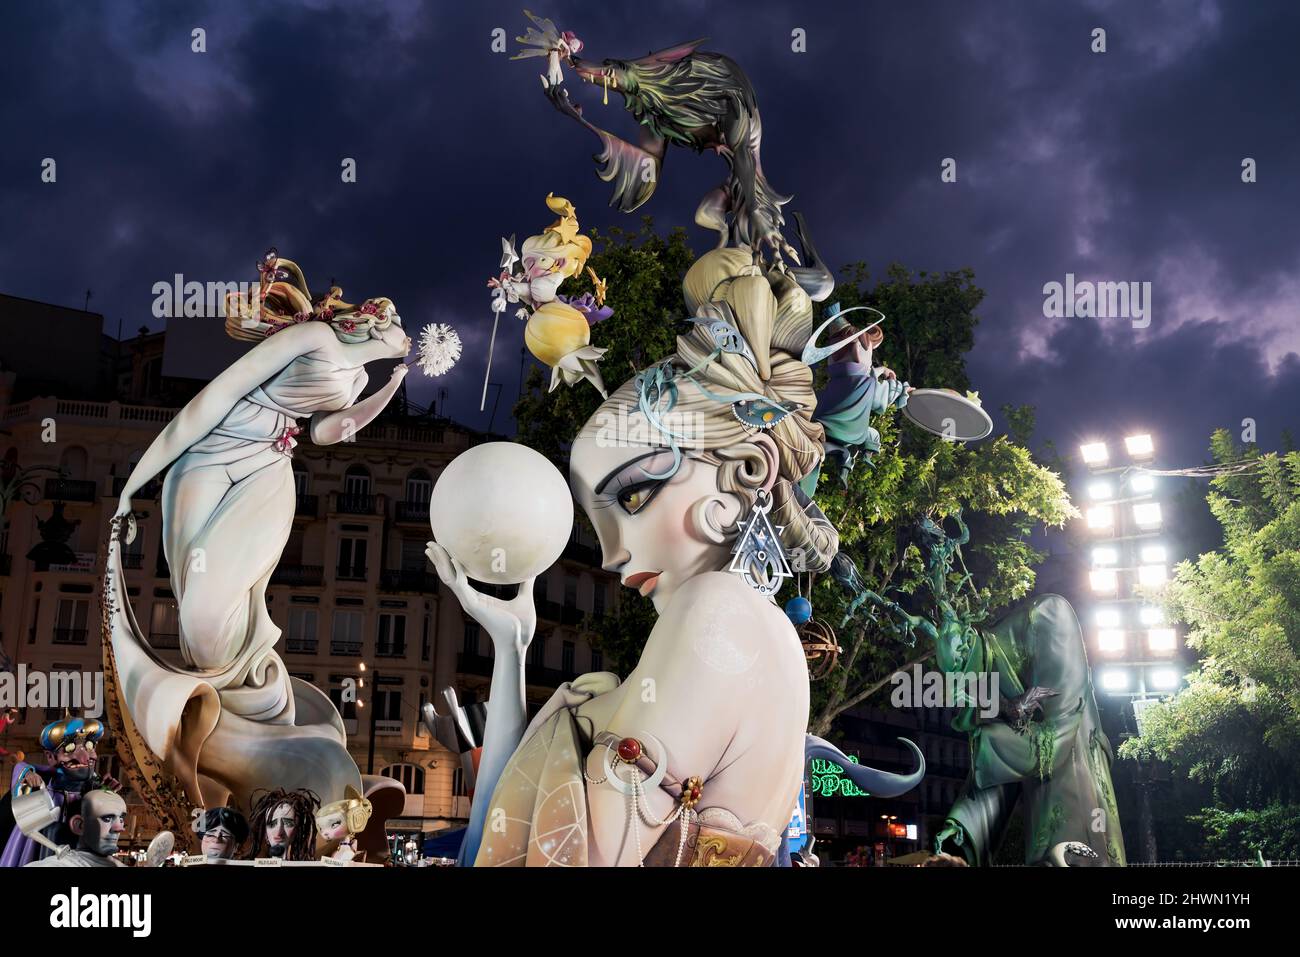 Valencia, Spain - 4 September 2021: 'Ninot' female figurine designed by the artist Carlos Carsi Garcia for the Fallas festival showing the two sides o Stock Photo